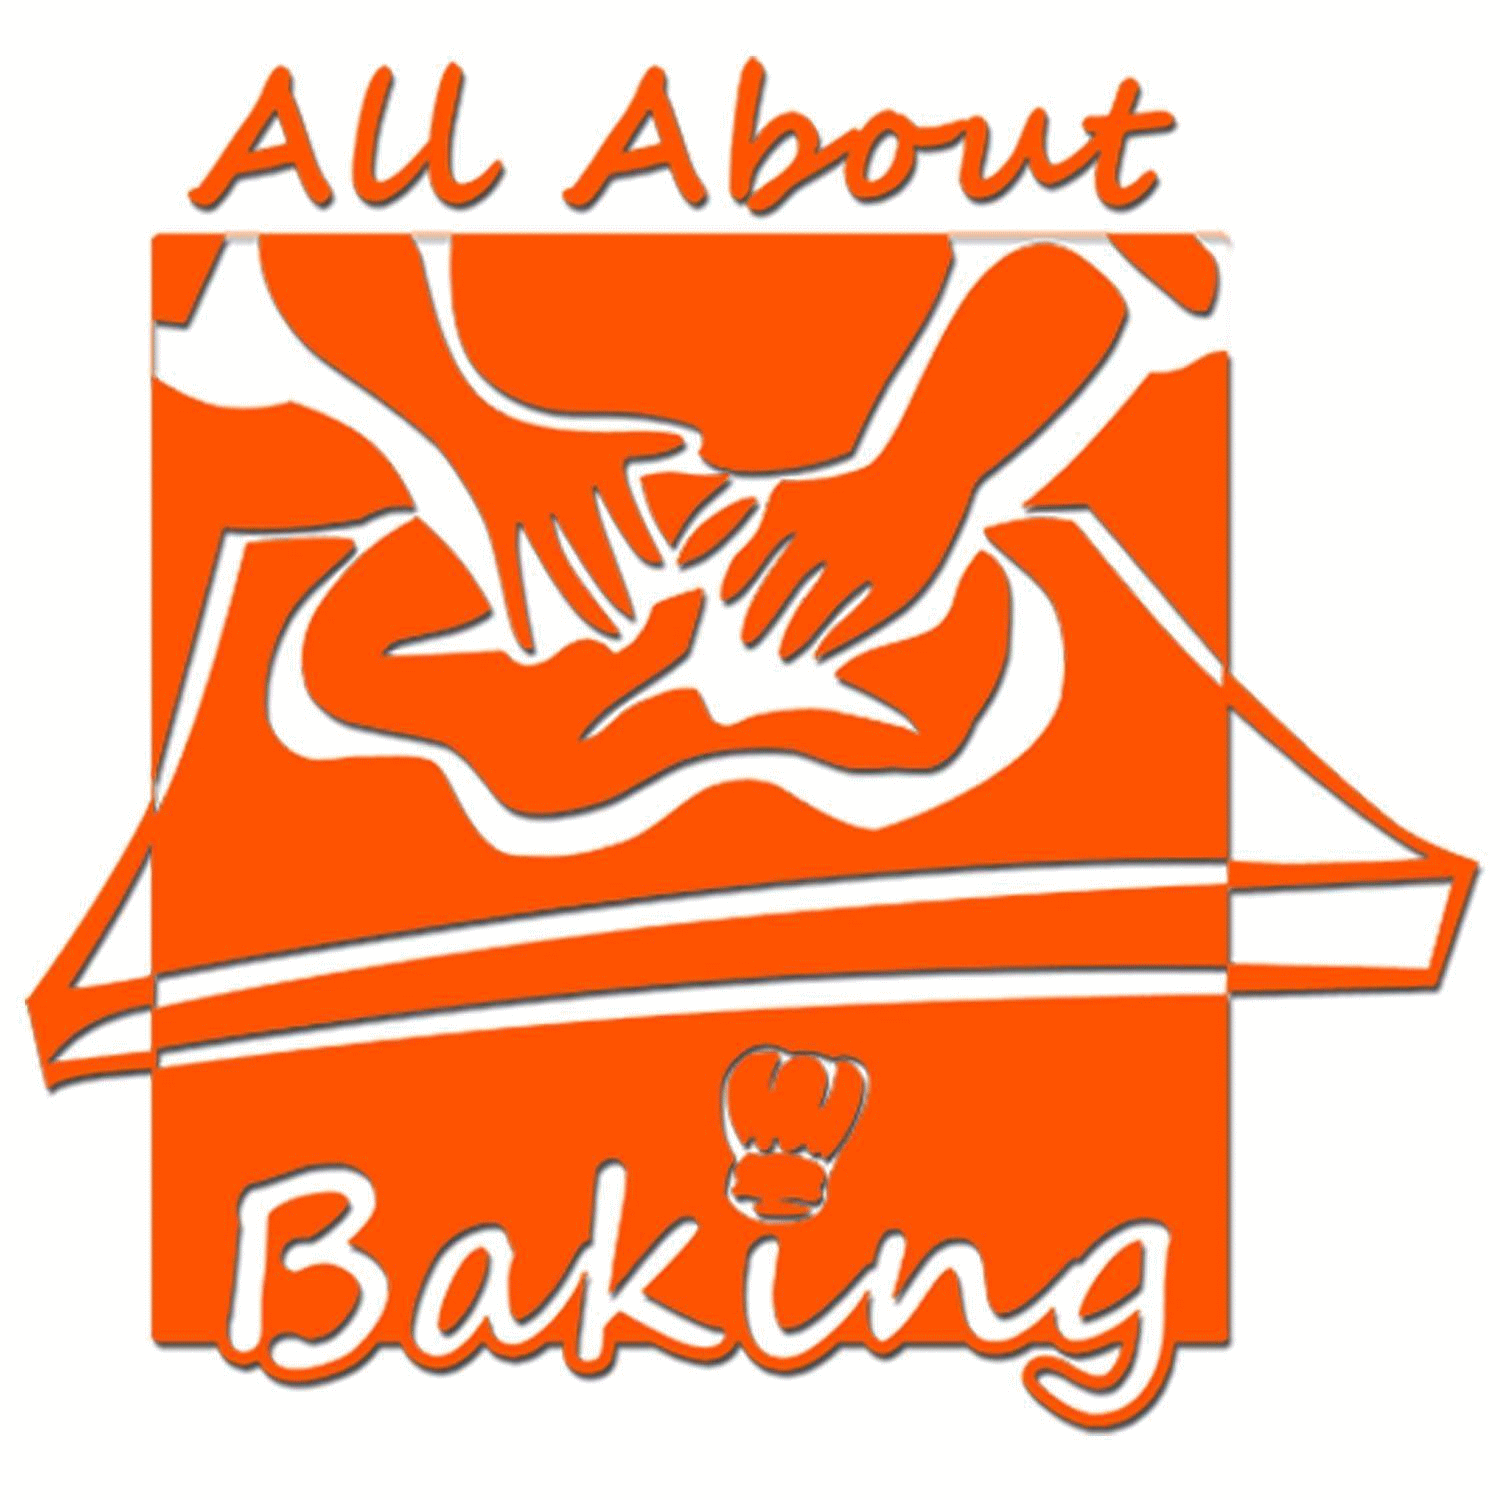 ALL ABOUT BAKING